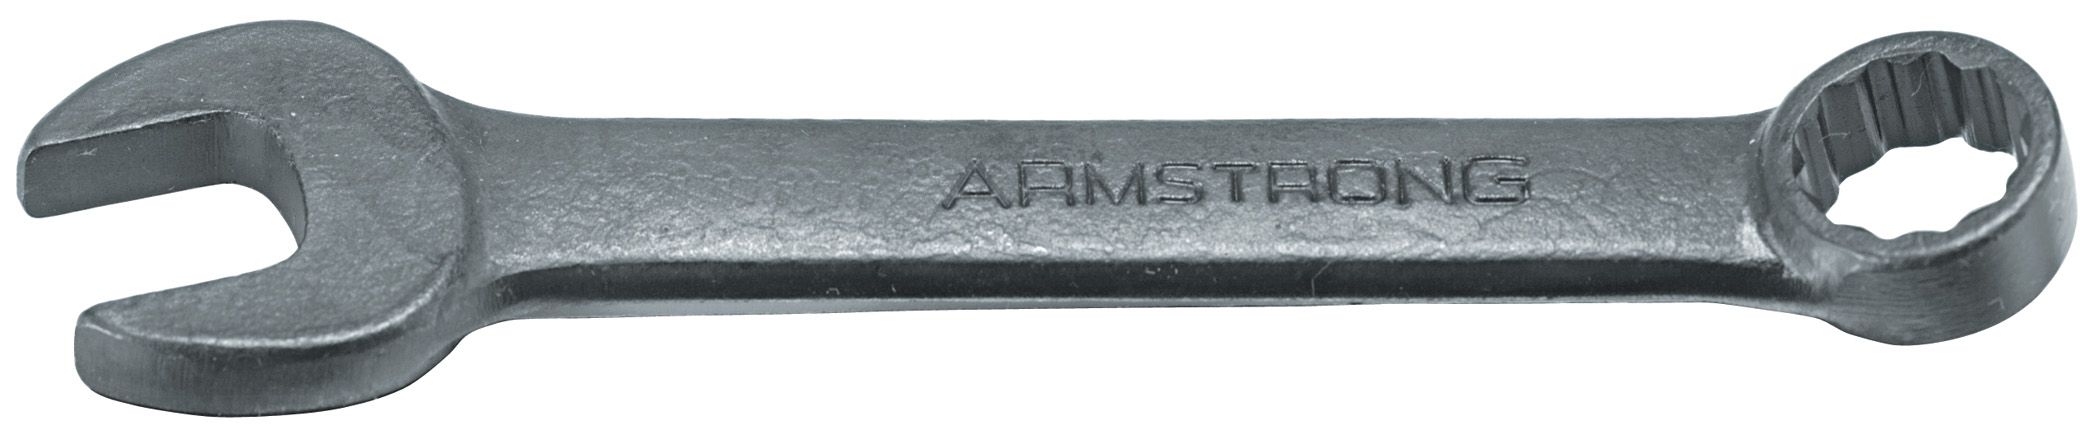 Armstrong 3/4 in. 12 pt. Black Oxide Short Combination Wrench